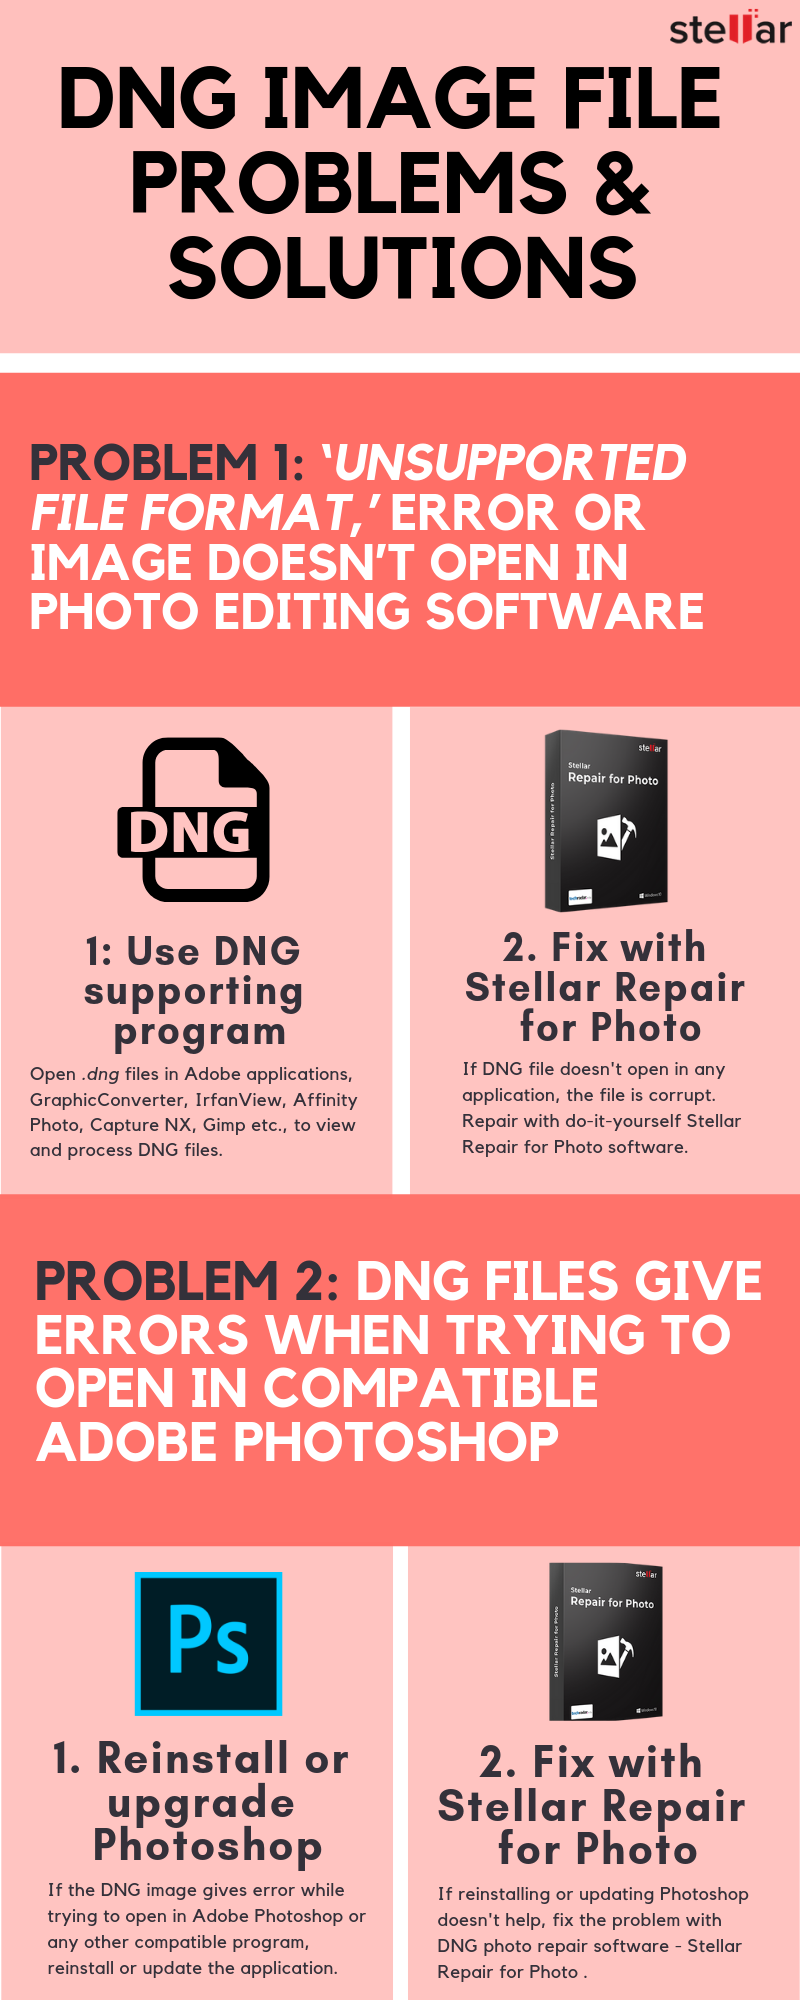 DNG IMAGE FILE PROBLEMS & SOLUTIONS